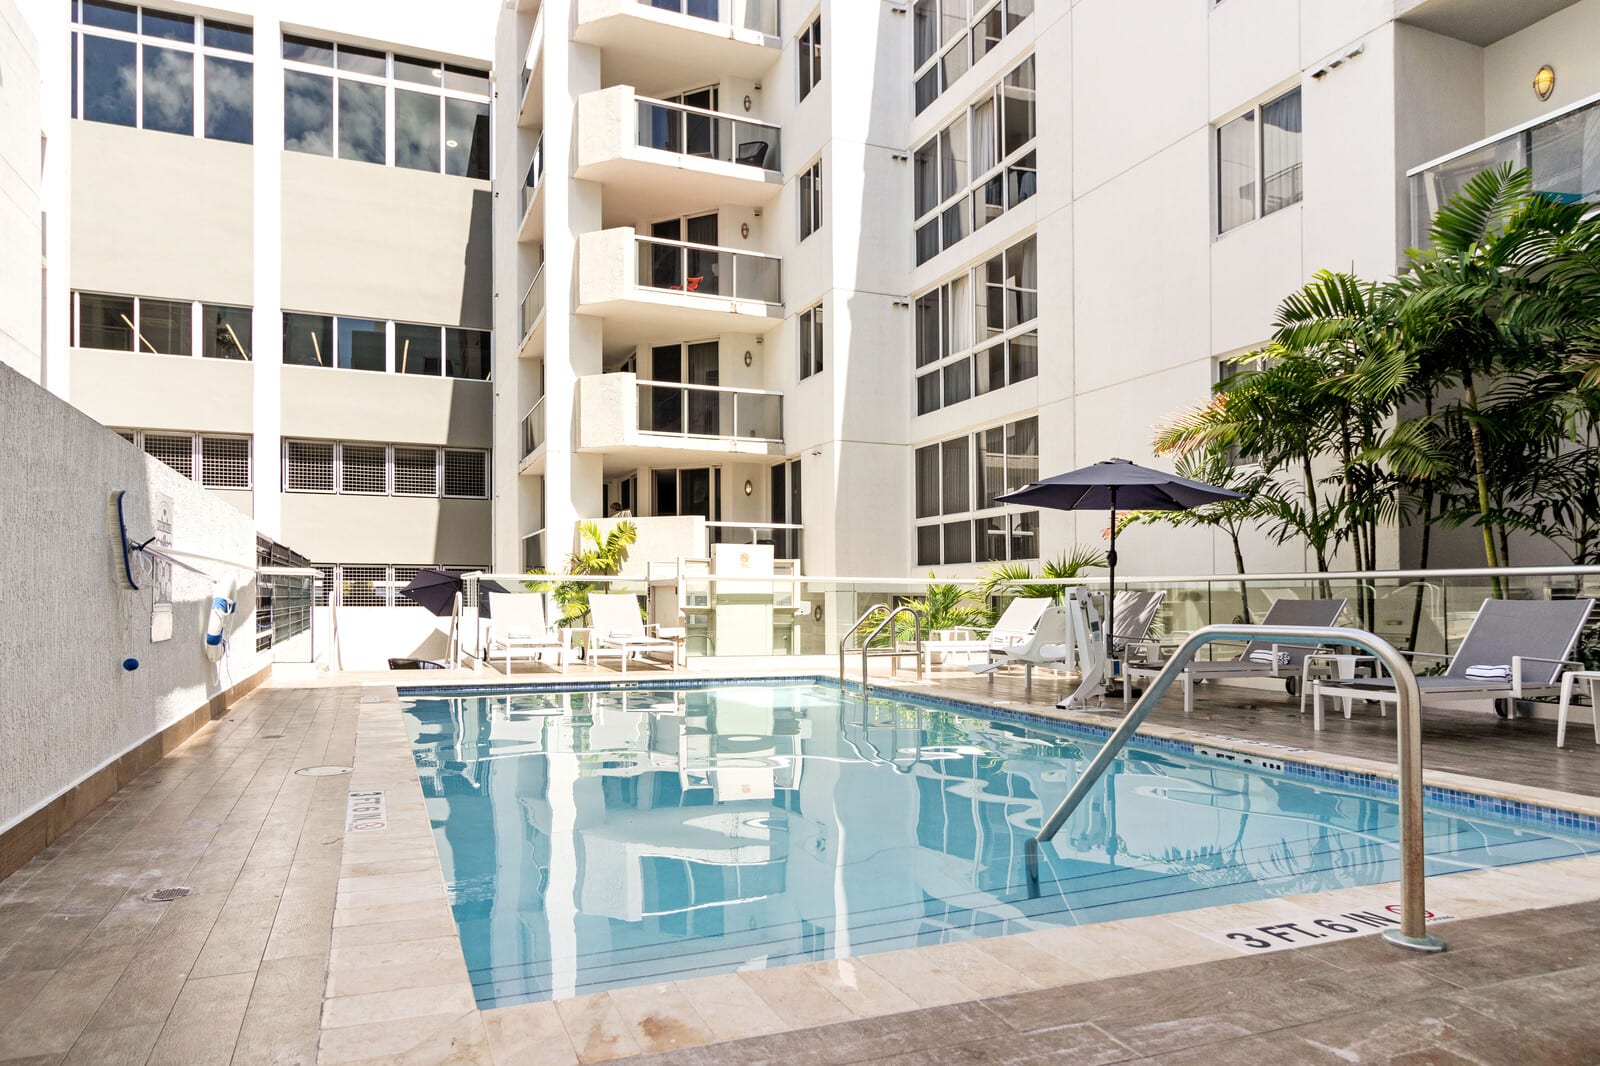 Property Image 2 - Property Manager | 10min to Beach | Pool + Balcony | Brickell